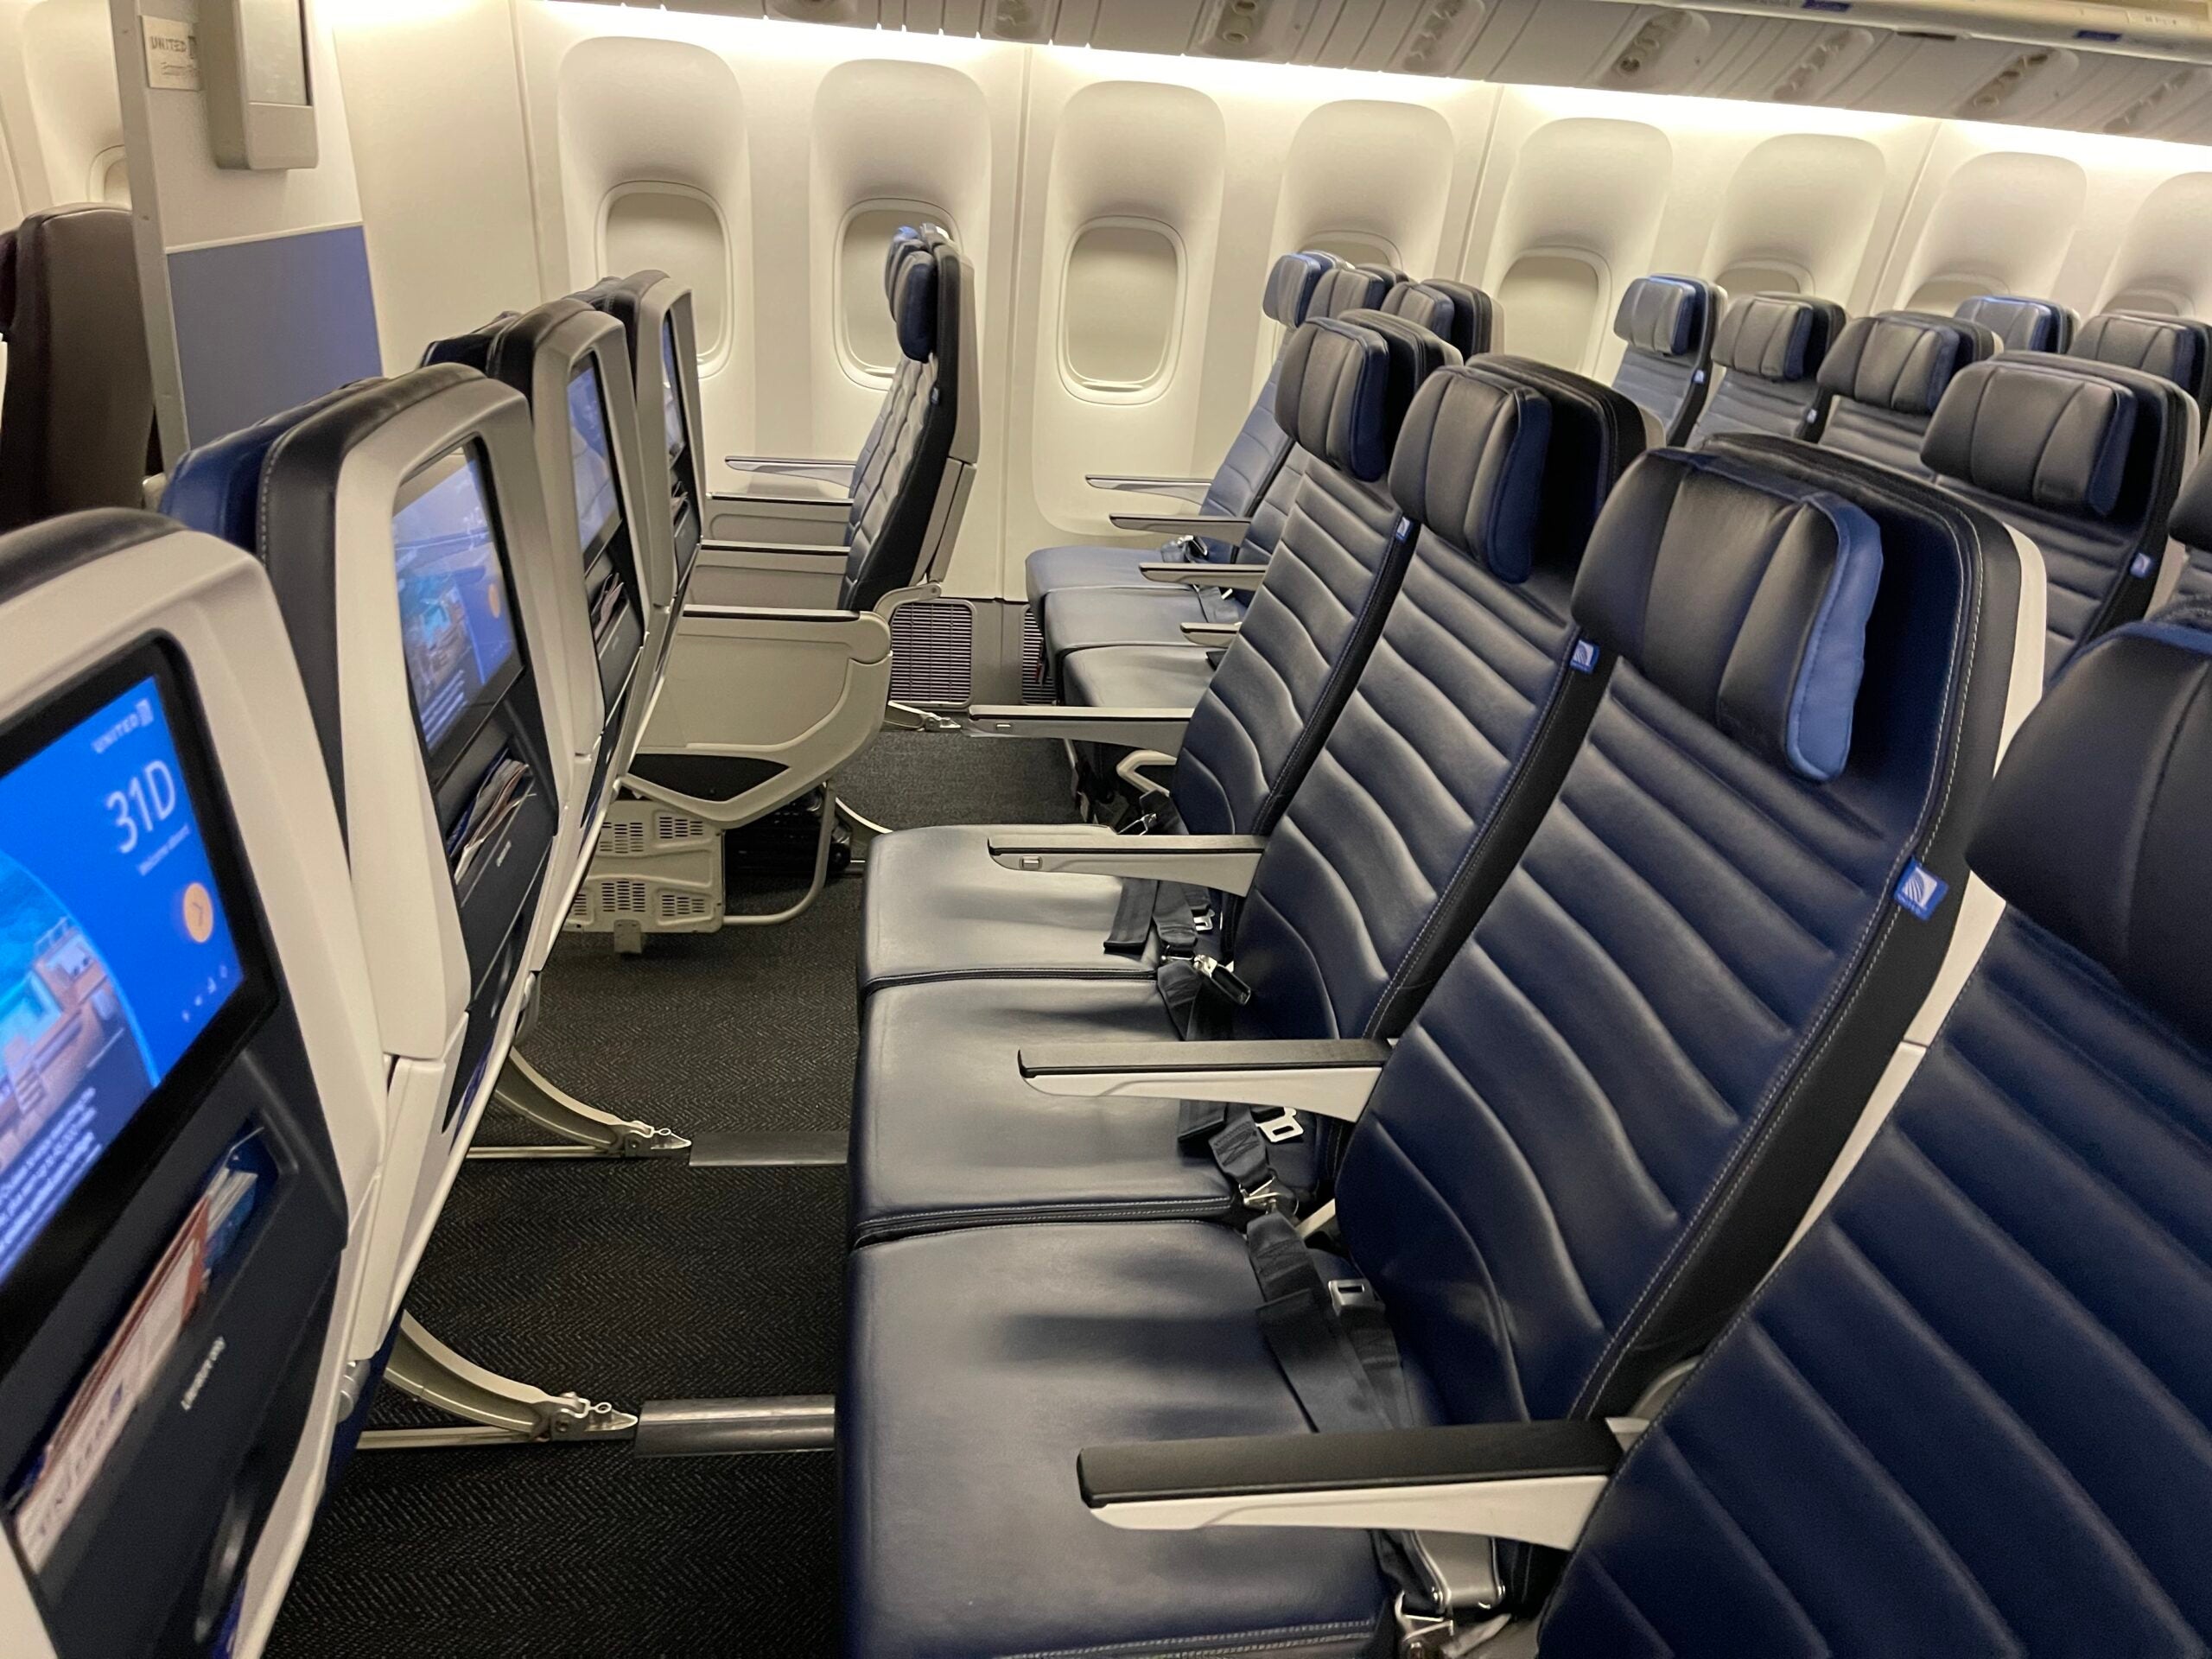 United Airlines Boeing 777-200ER economy class